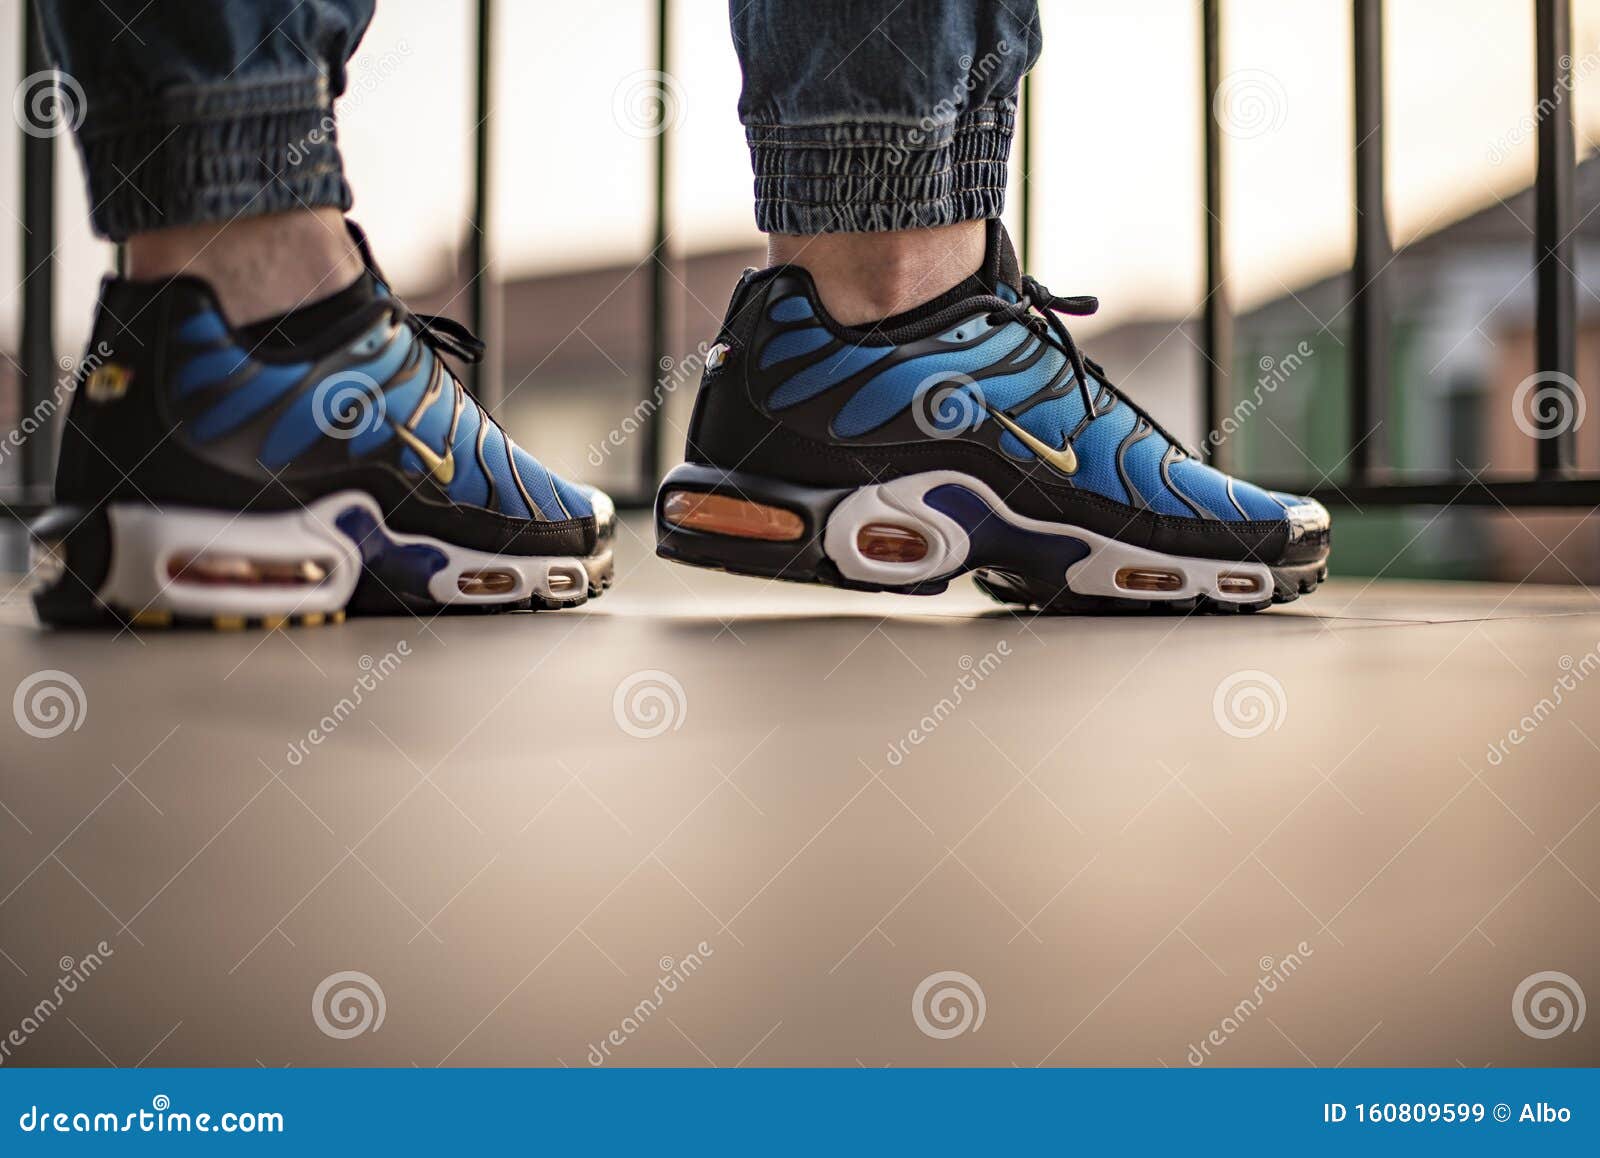 Nike Air Max Plus TN Hyperblue Editorial Stock Image - Image of